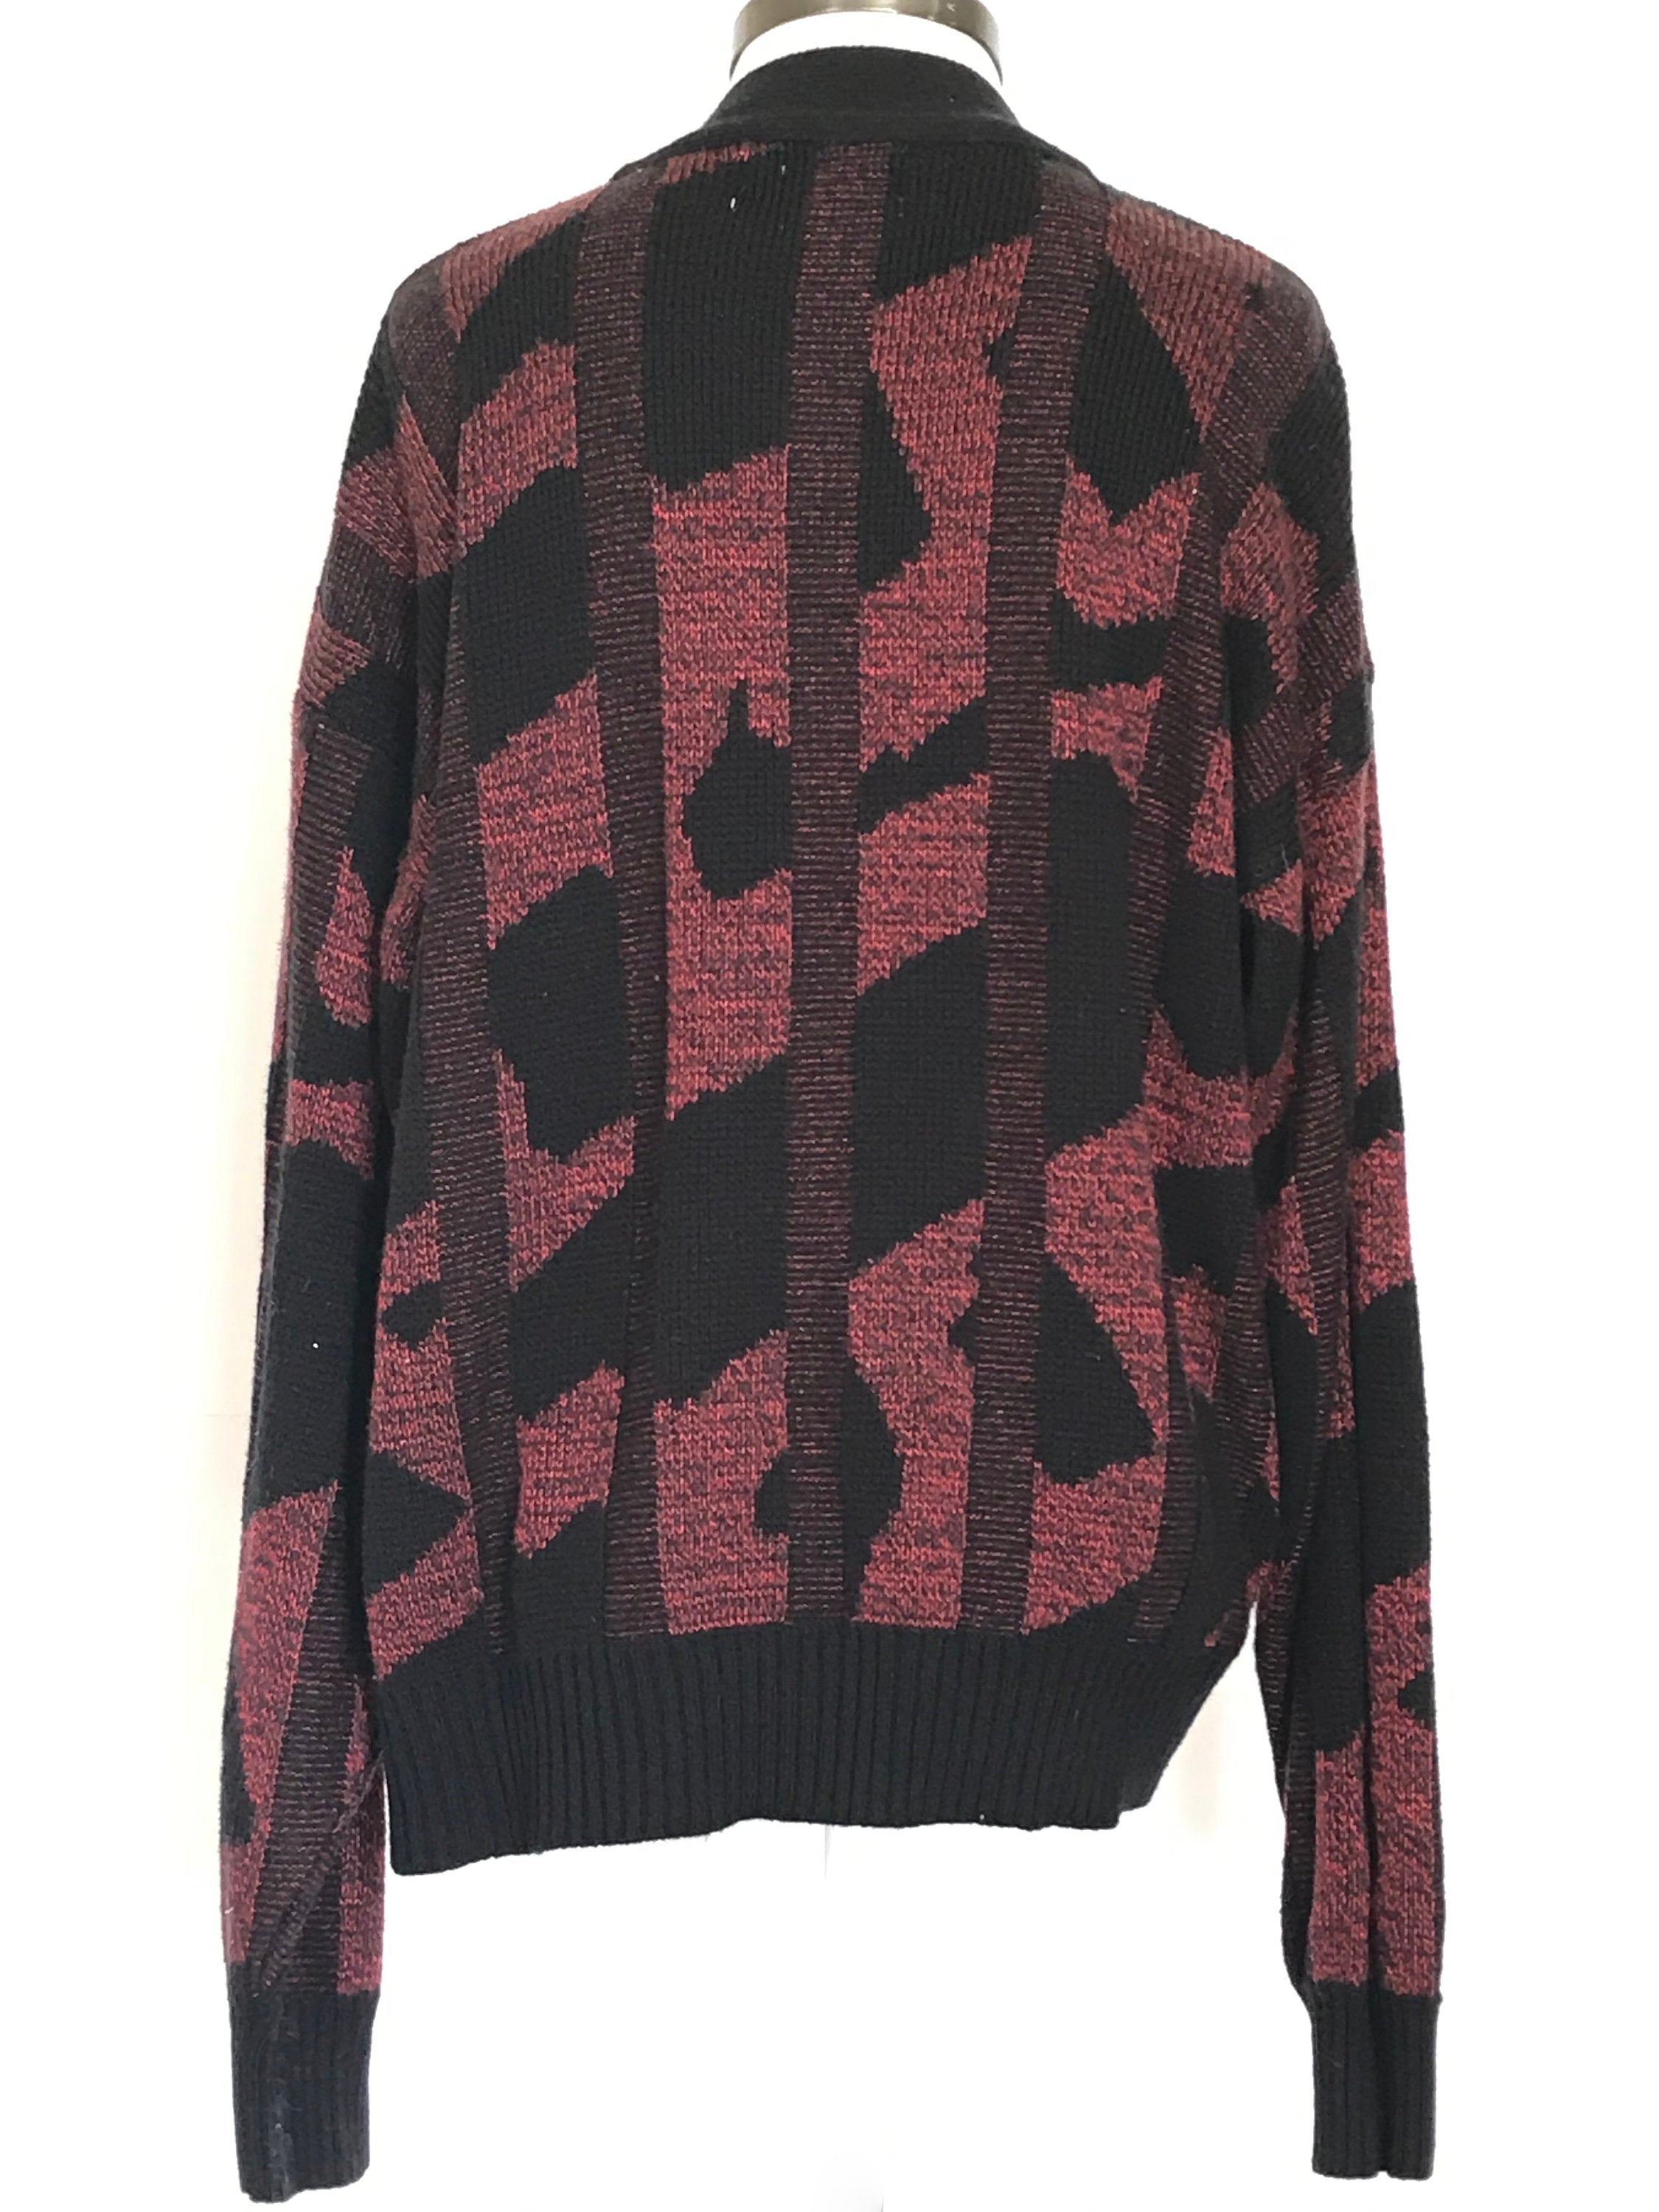 Vintage 80's/90's Black and Red Abstract Geometric Print Cardigan by ...